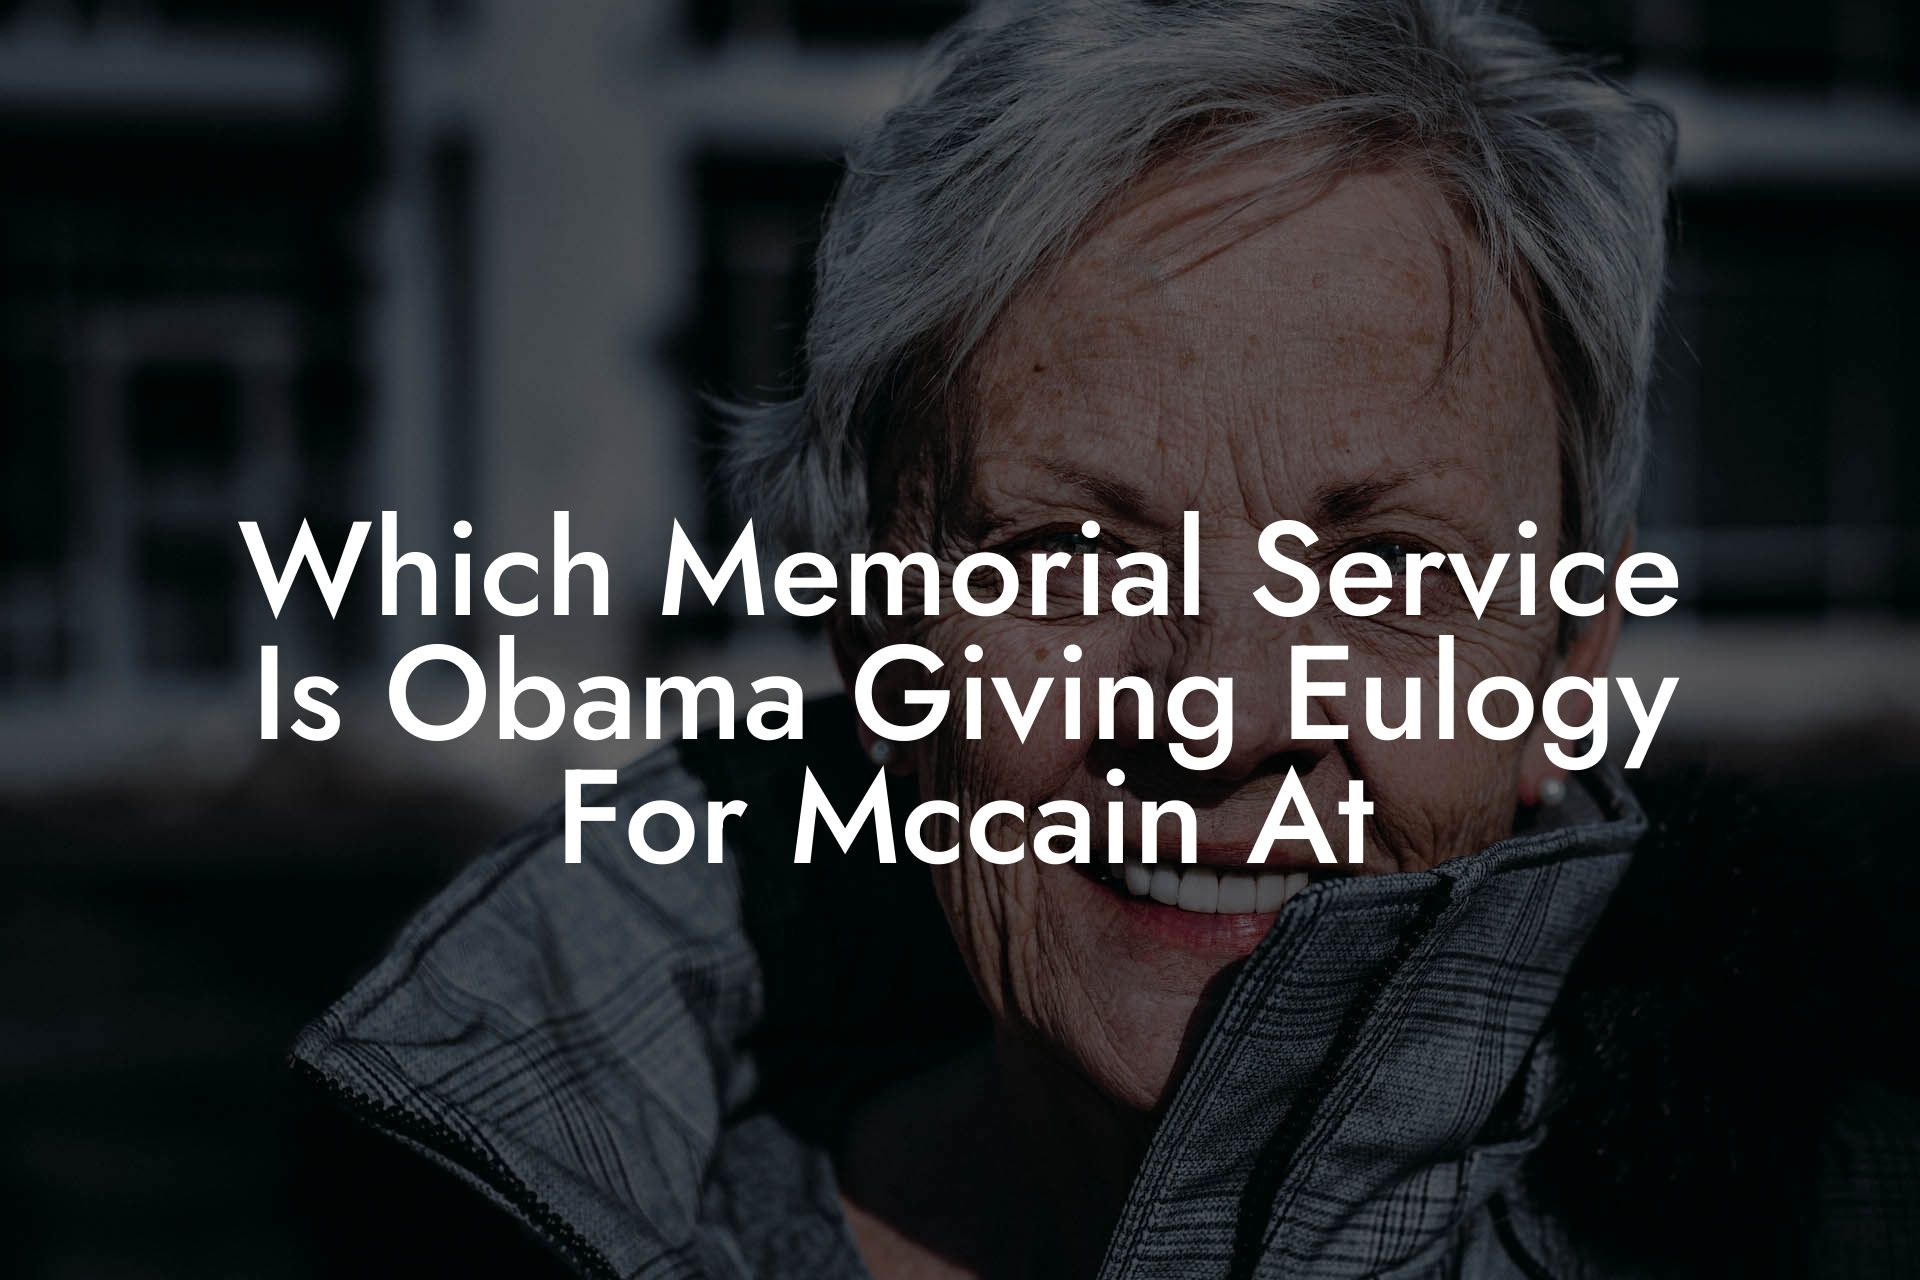 Which Memorial Service Is Obama Giving Eulogy For Mccain At